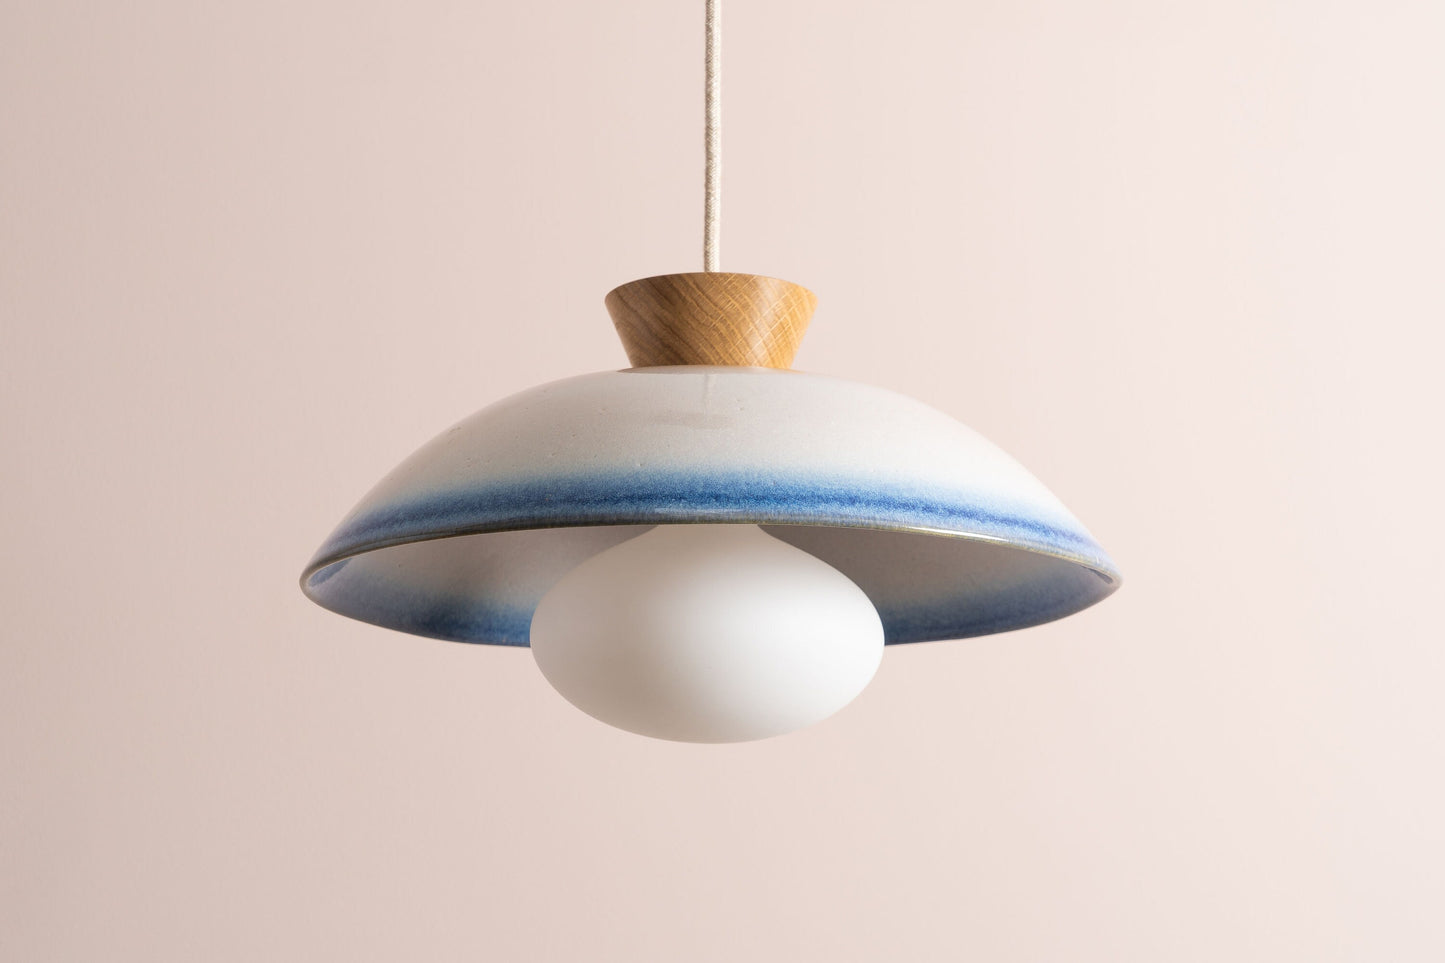 Dawn pendant light in a blue and white gloss glaze by StudioHaran